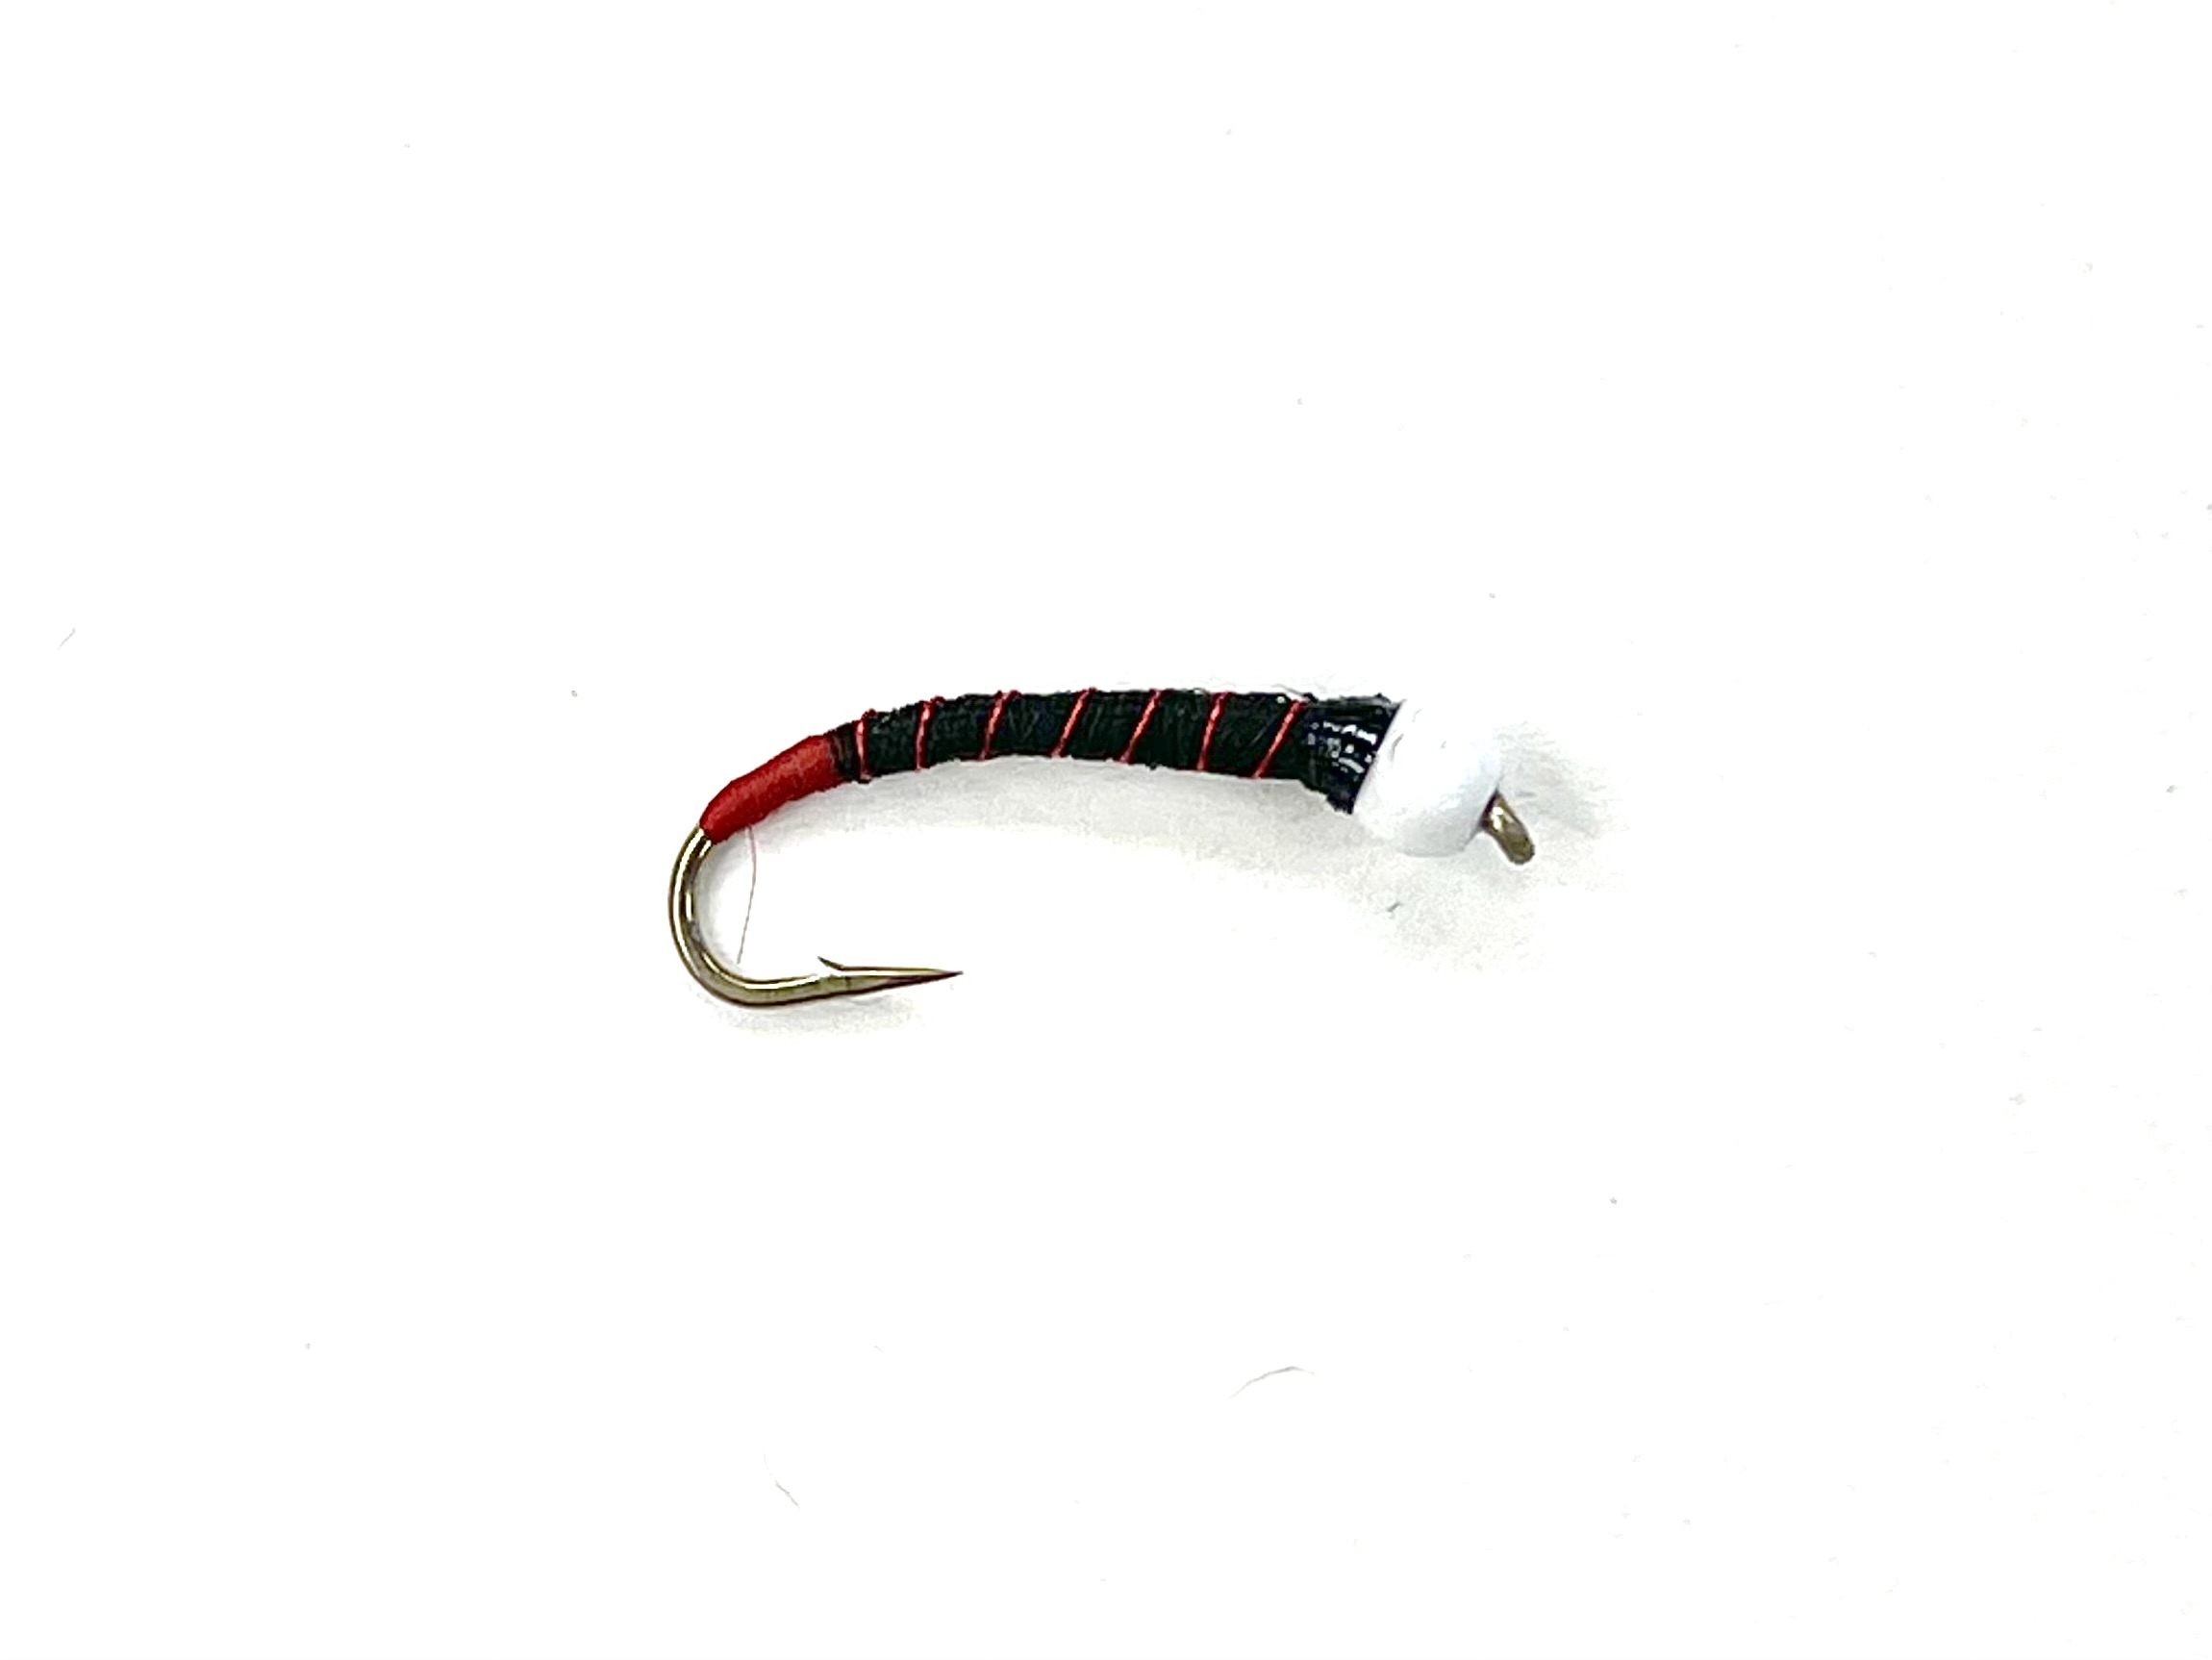 FAD Candy Cone Red Butt Chironomid - Black/Red Wire - Size 16